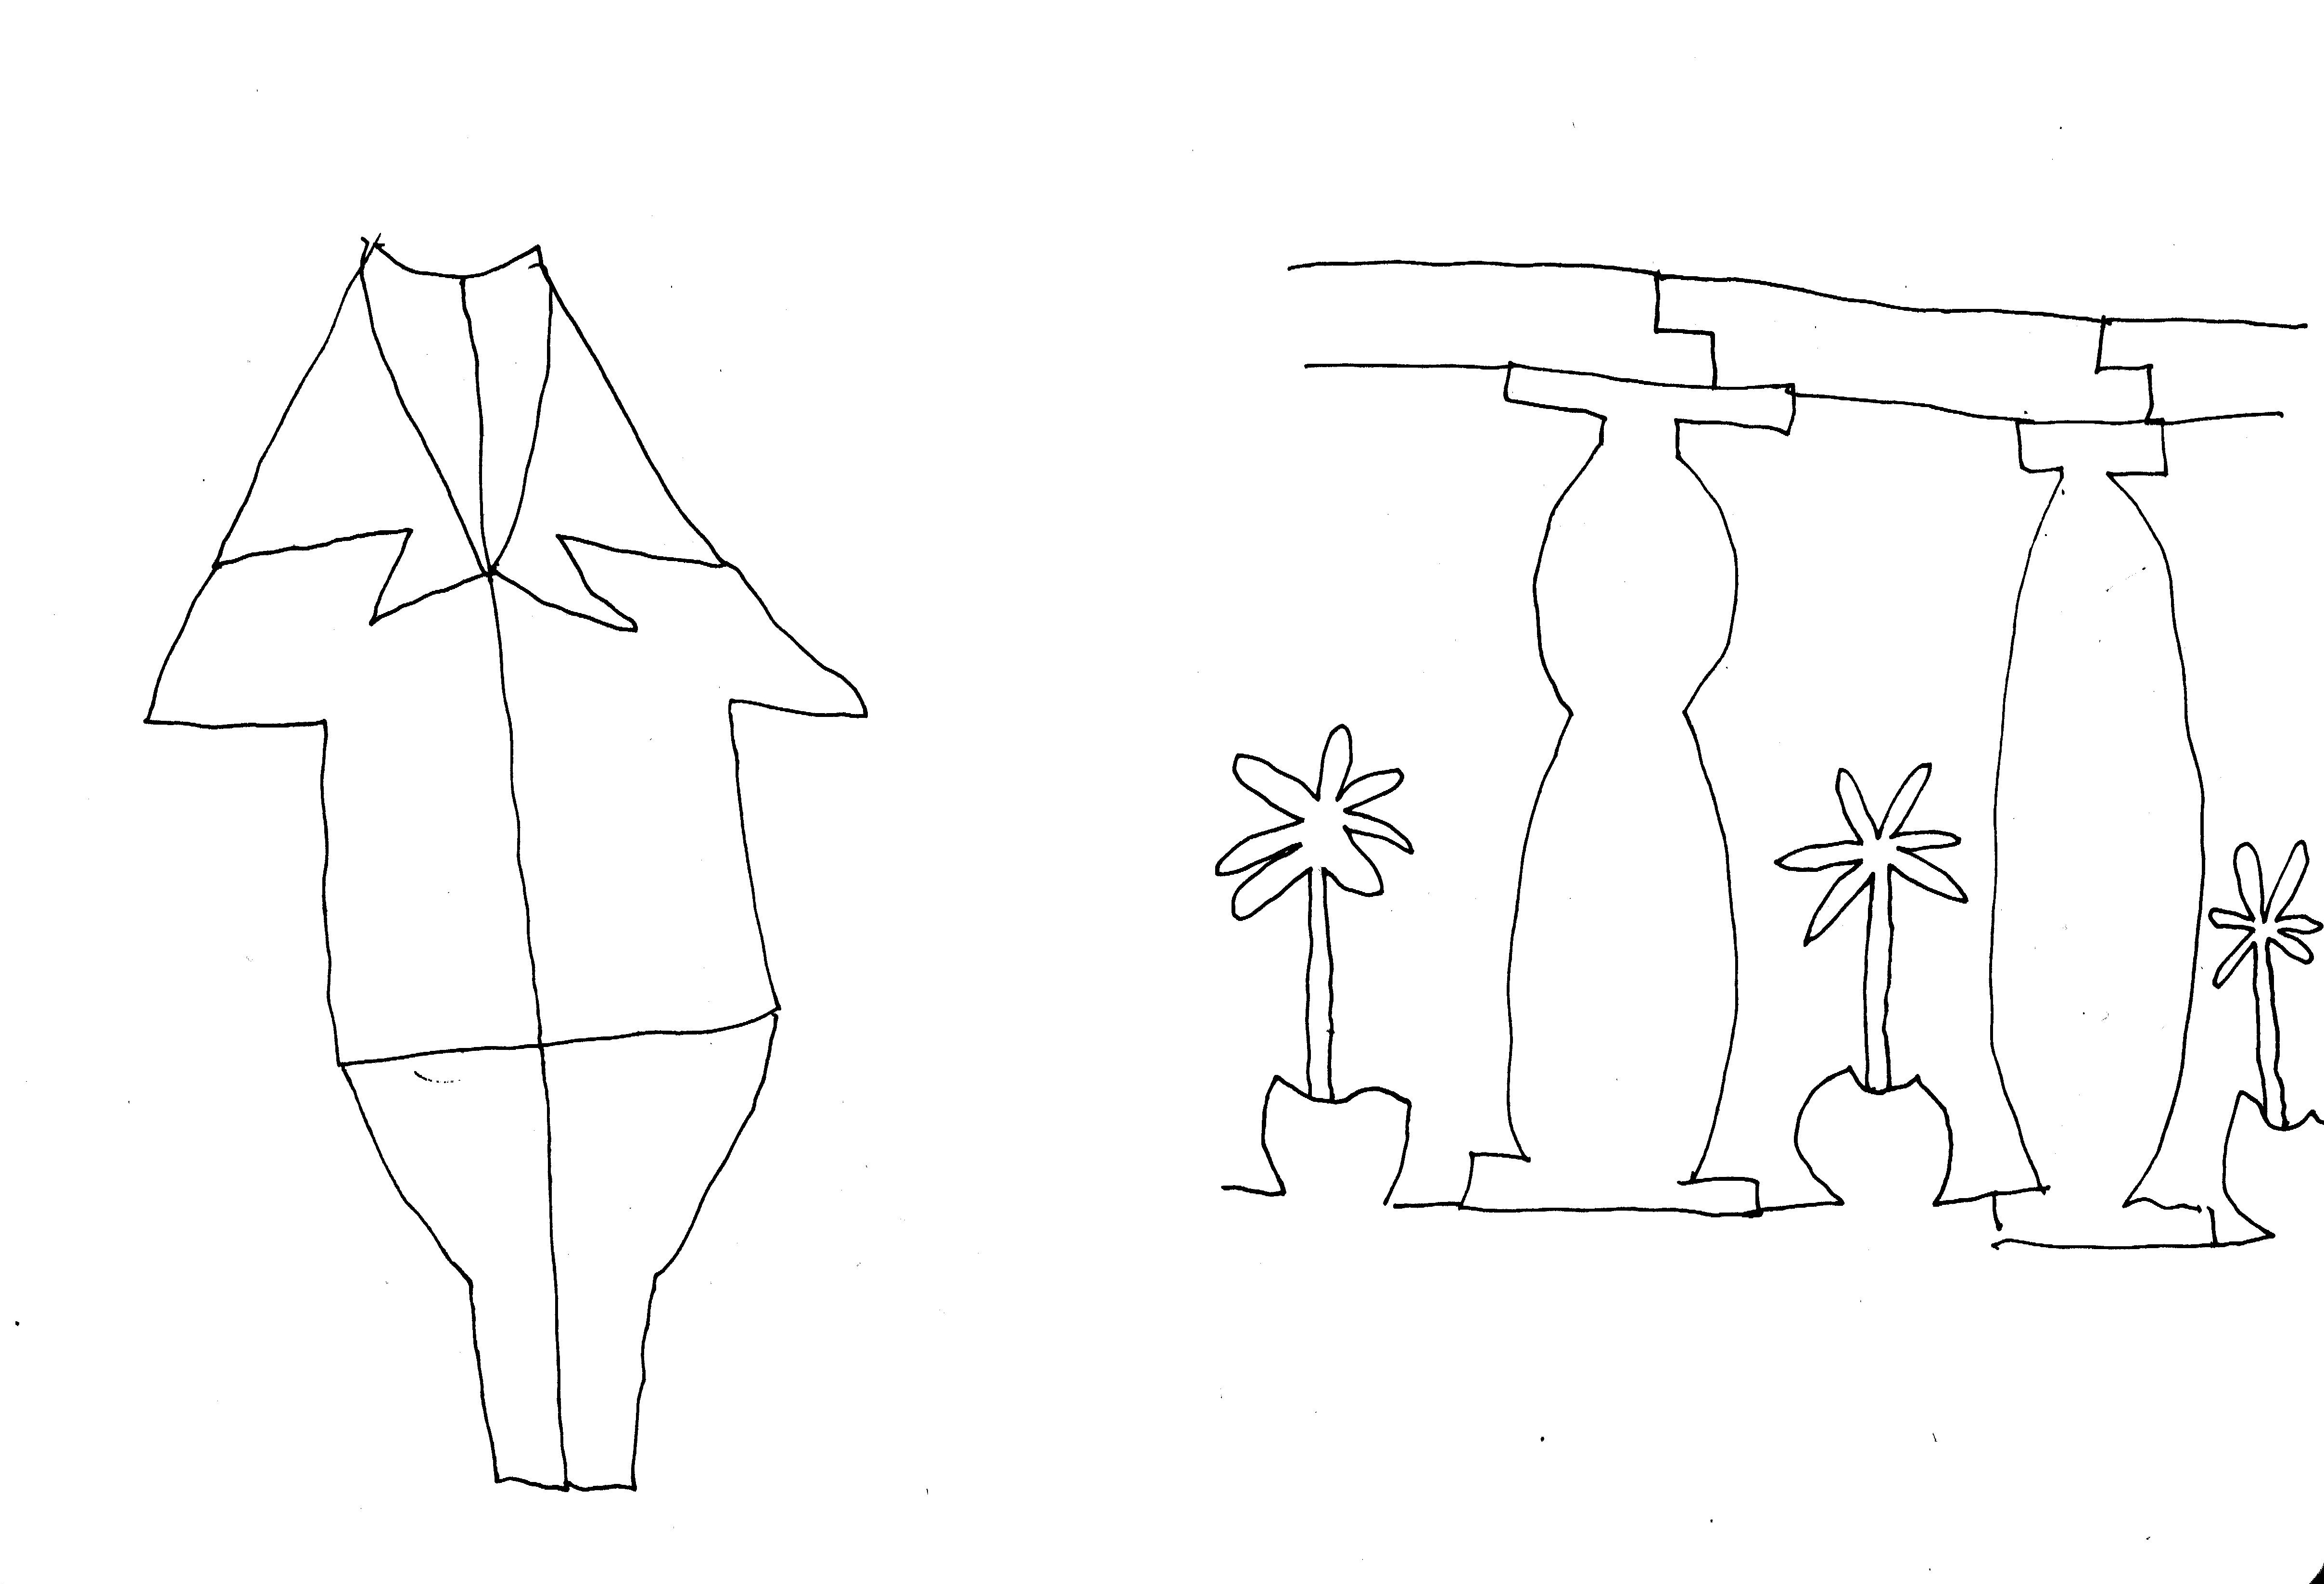 pen drawing of suit without a person and a loggia with plants